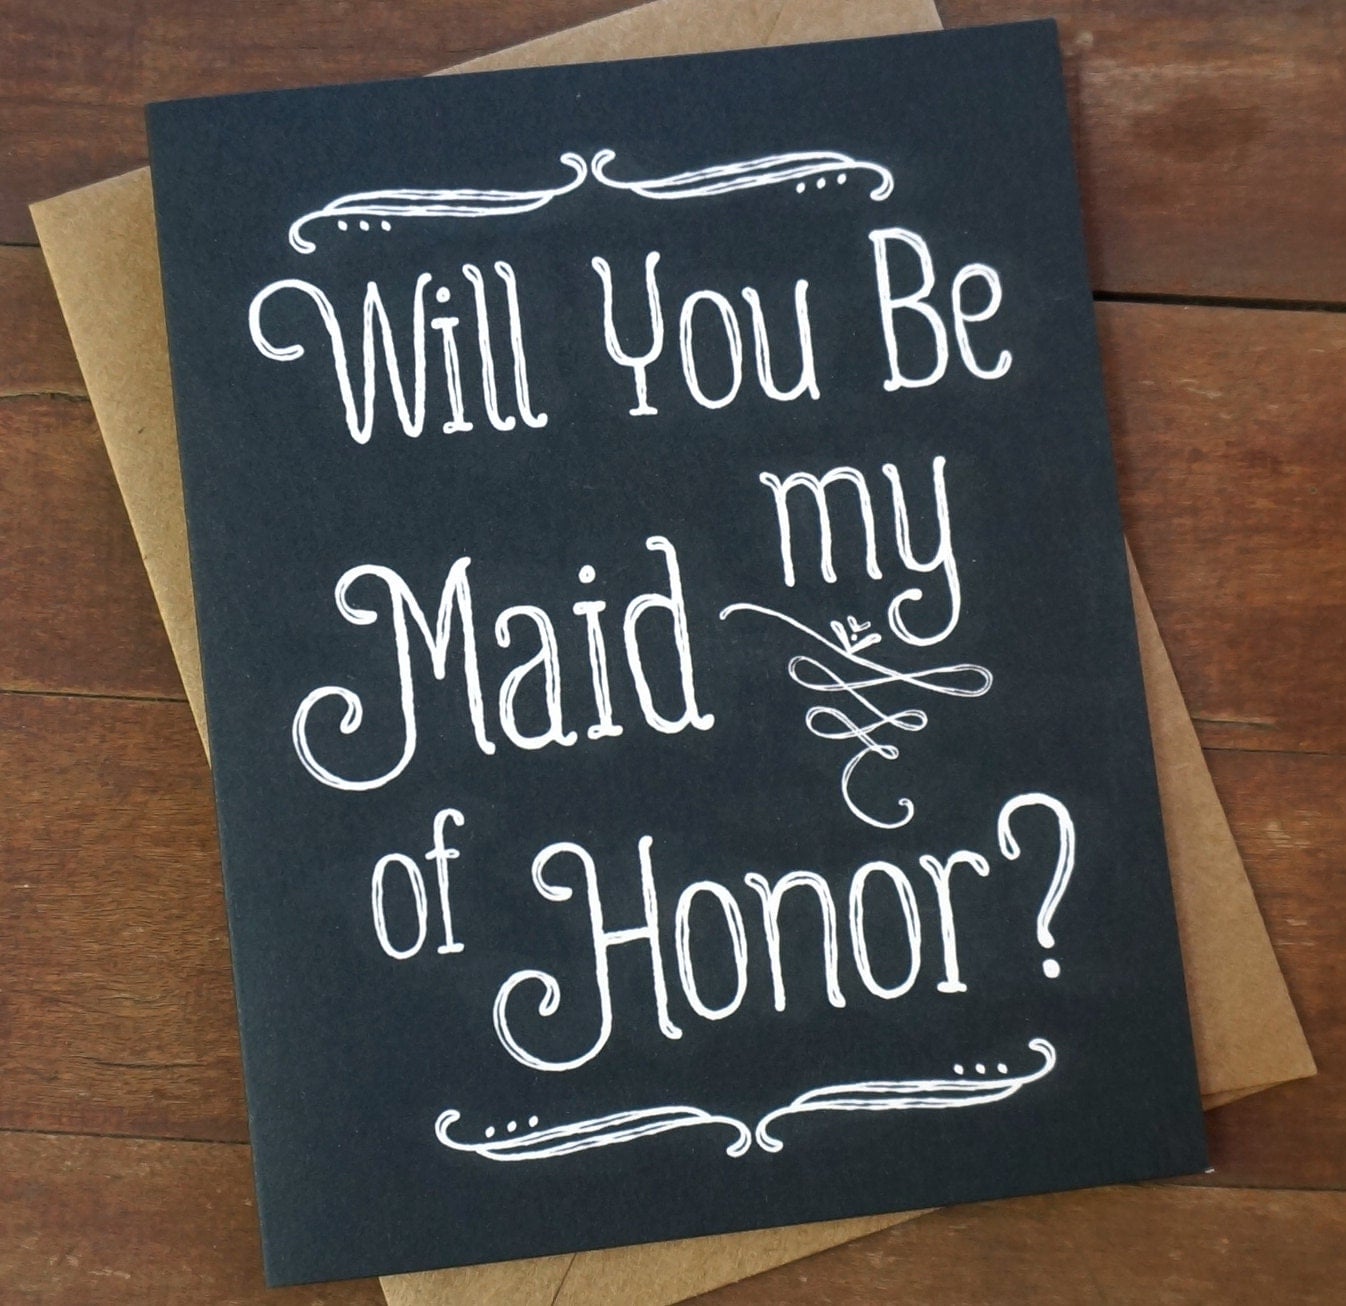 asking-maid-of-honor-card-will-you-be-my-maid-of-honor-card